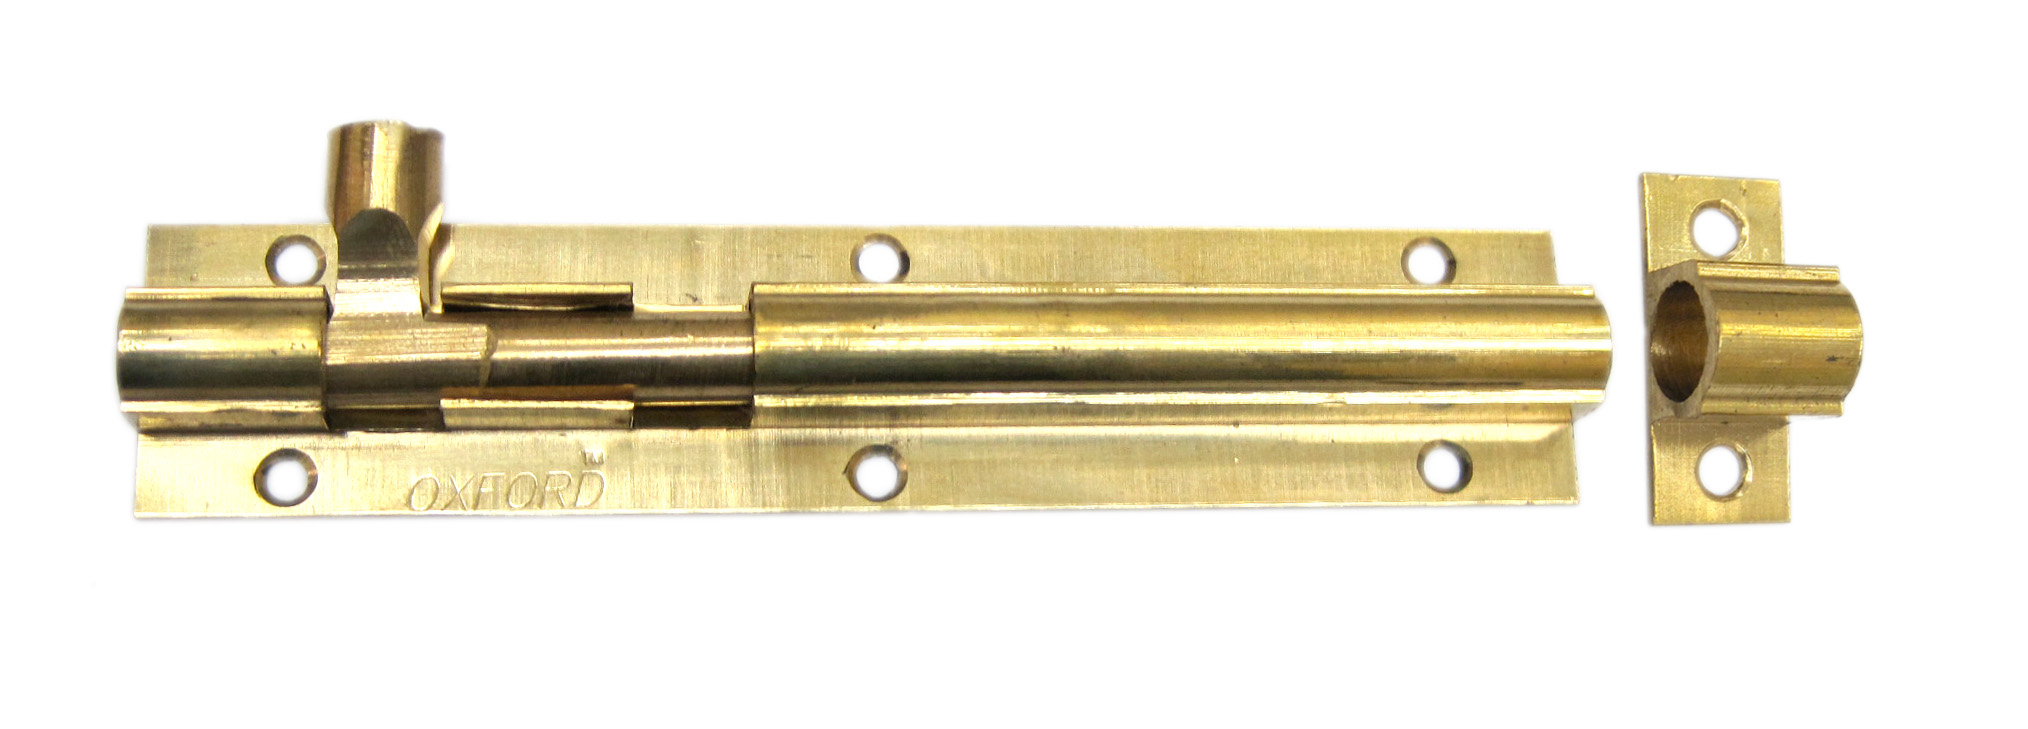 BRASS TOWER BOLT 1/2X 6 In CO01